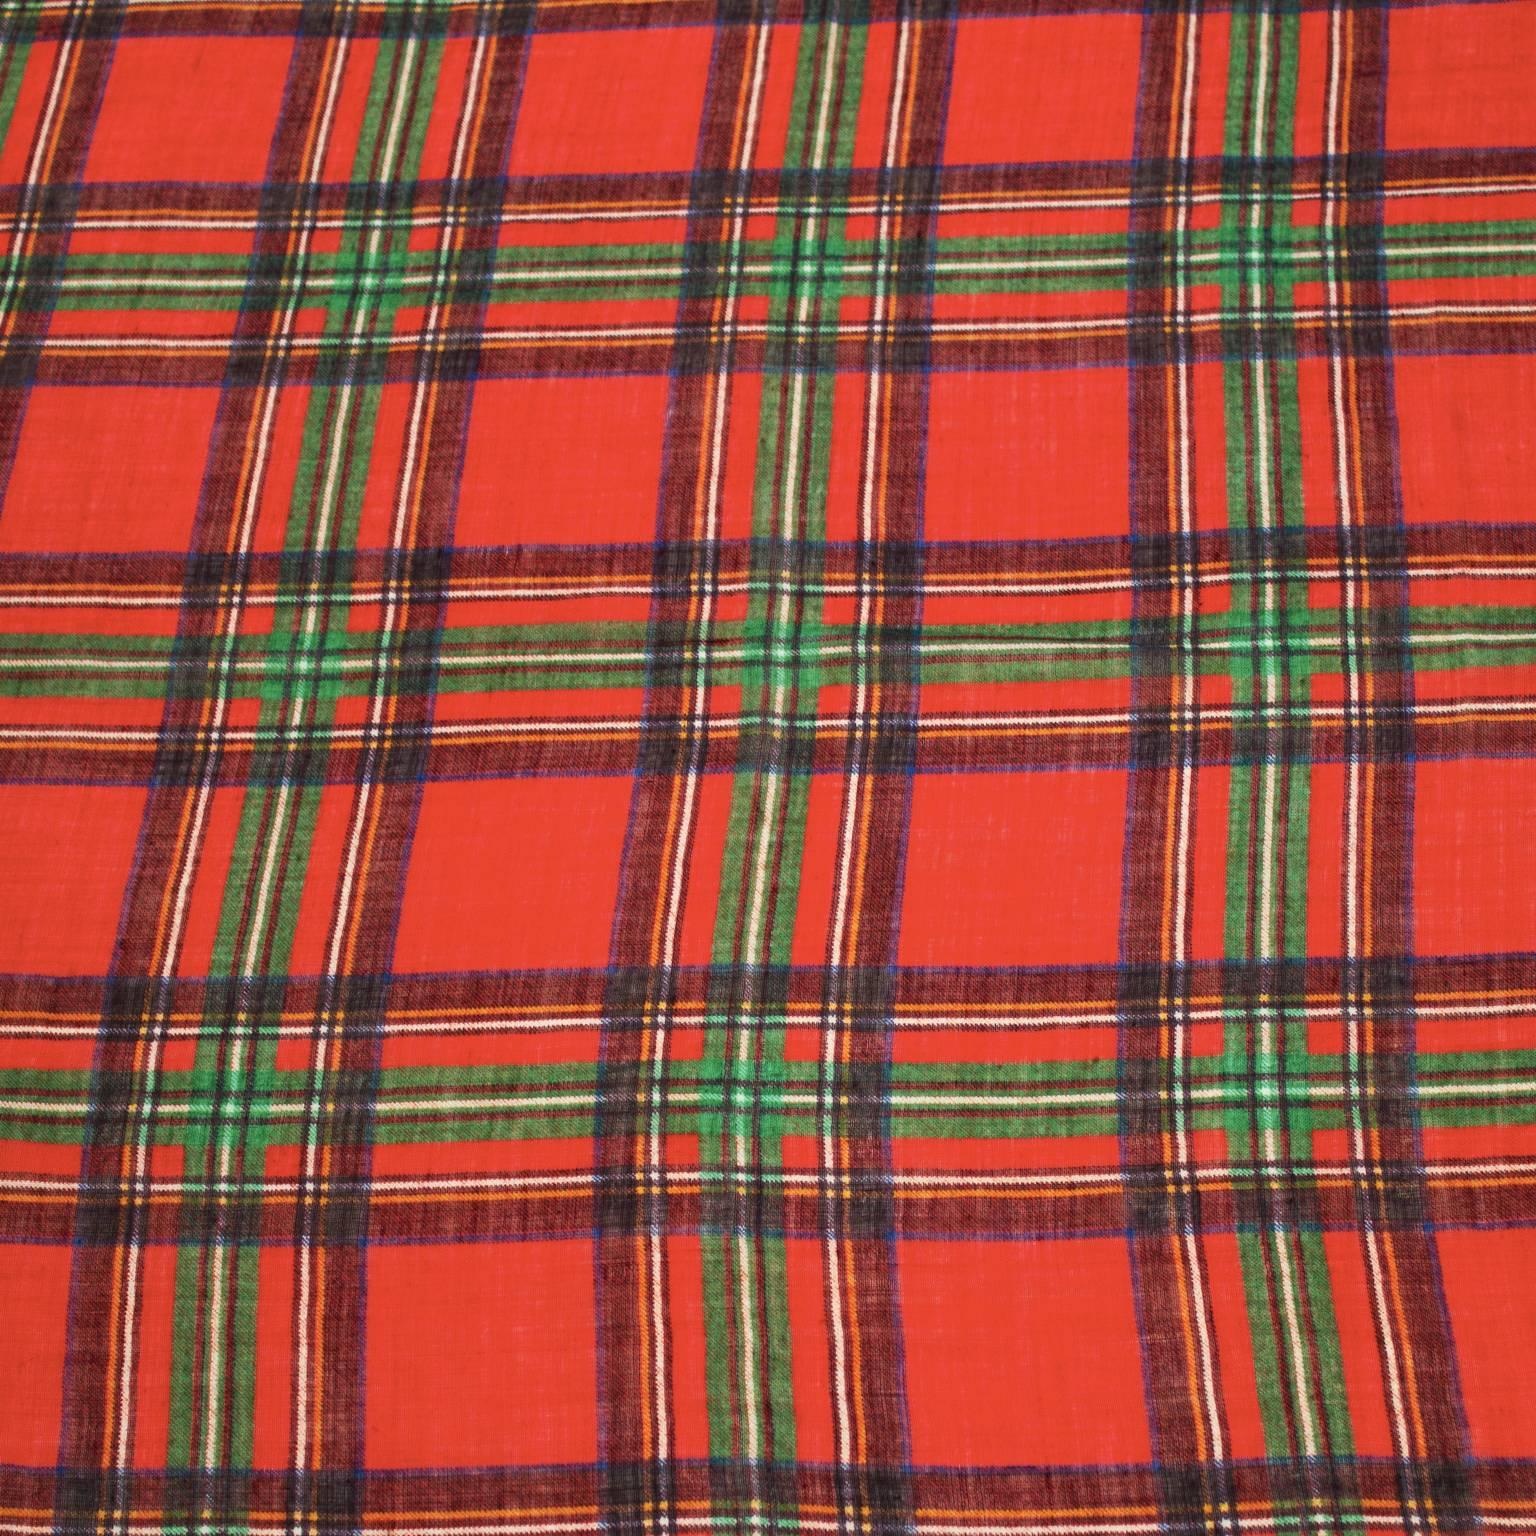 Yves Saint Laurent silk cashmere blend scarf from the 1970's. The red and green plaid scarf has a frayed edge detail and is signed with the YSL logo in the corner. In excellent condition. 